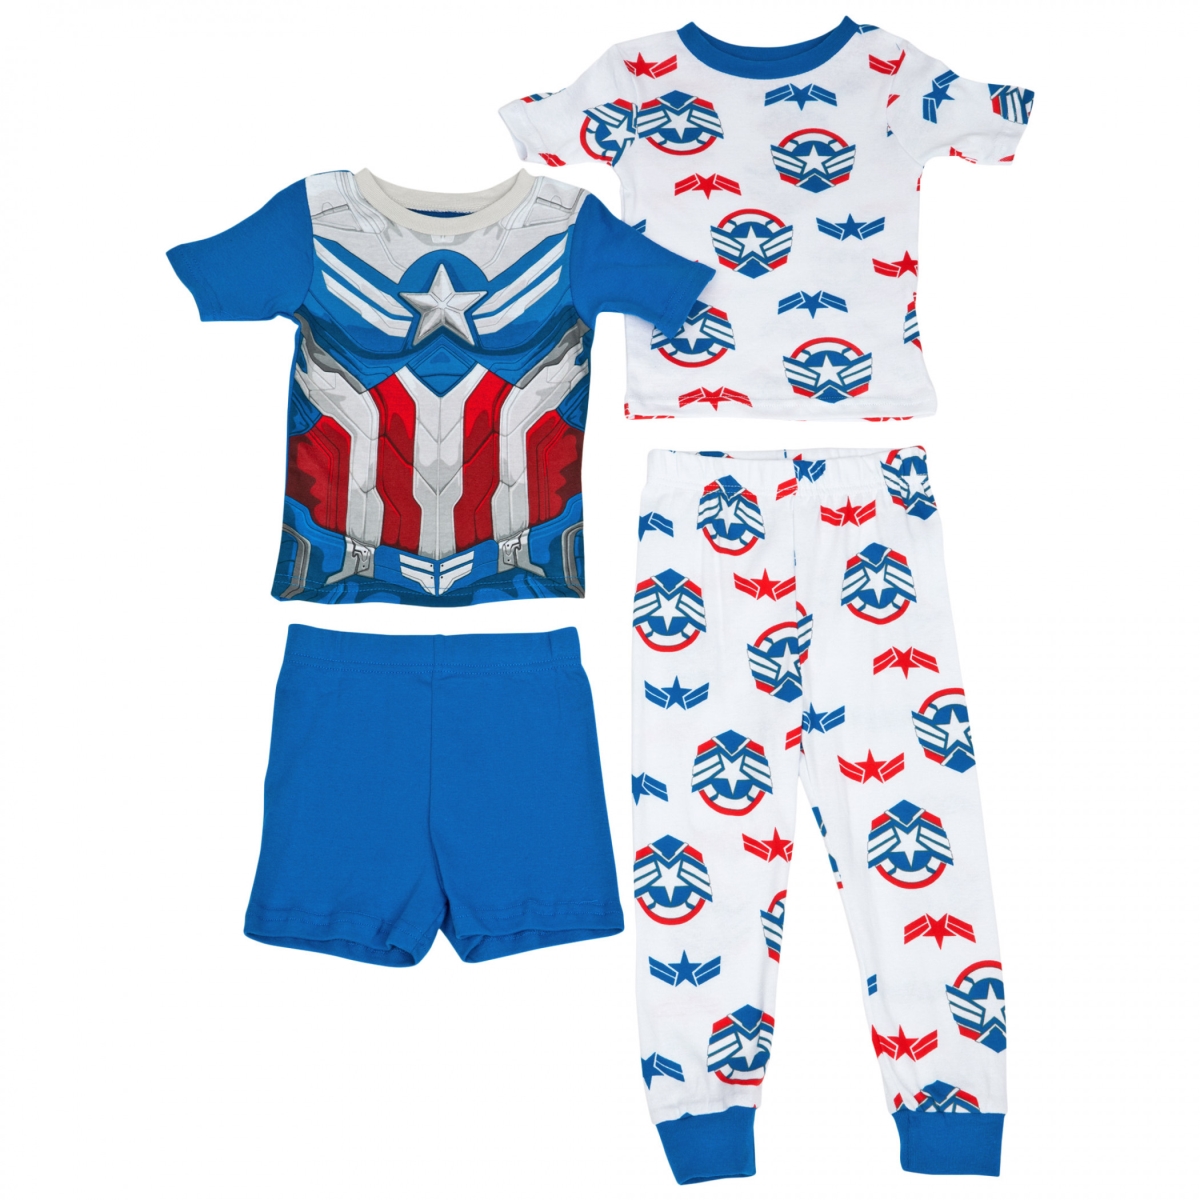 Picture of Captain America 838712-size4 Captain America Youth Shirts Shorts & Pants Set - Size 4 - 4 Piece